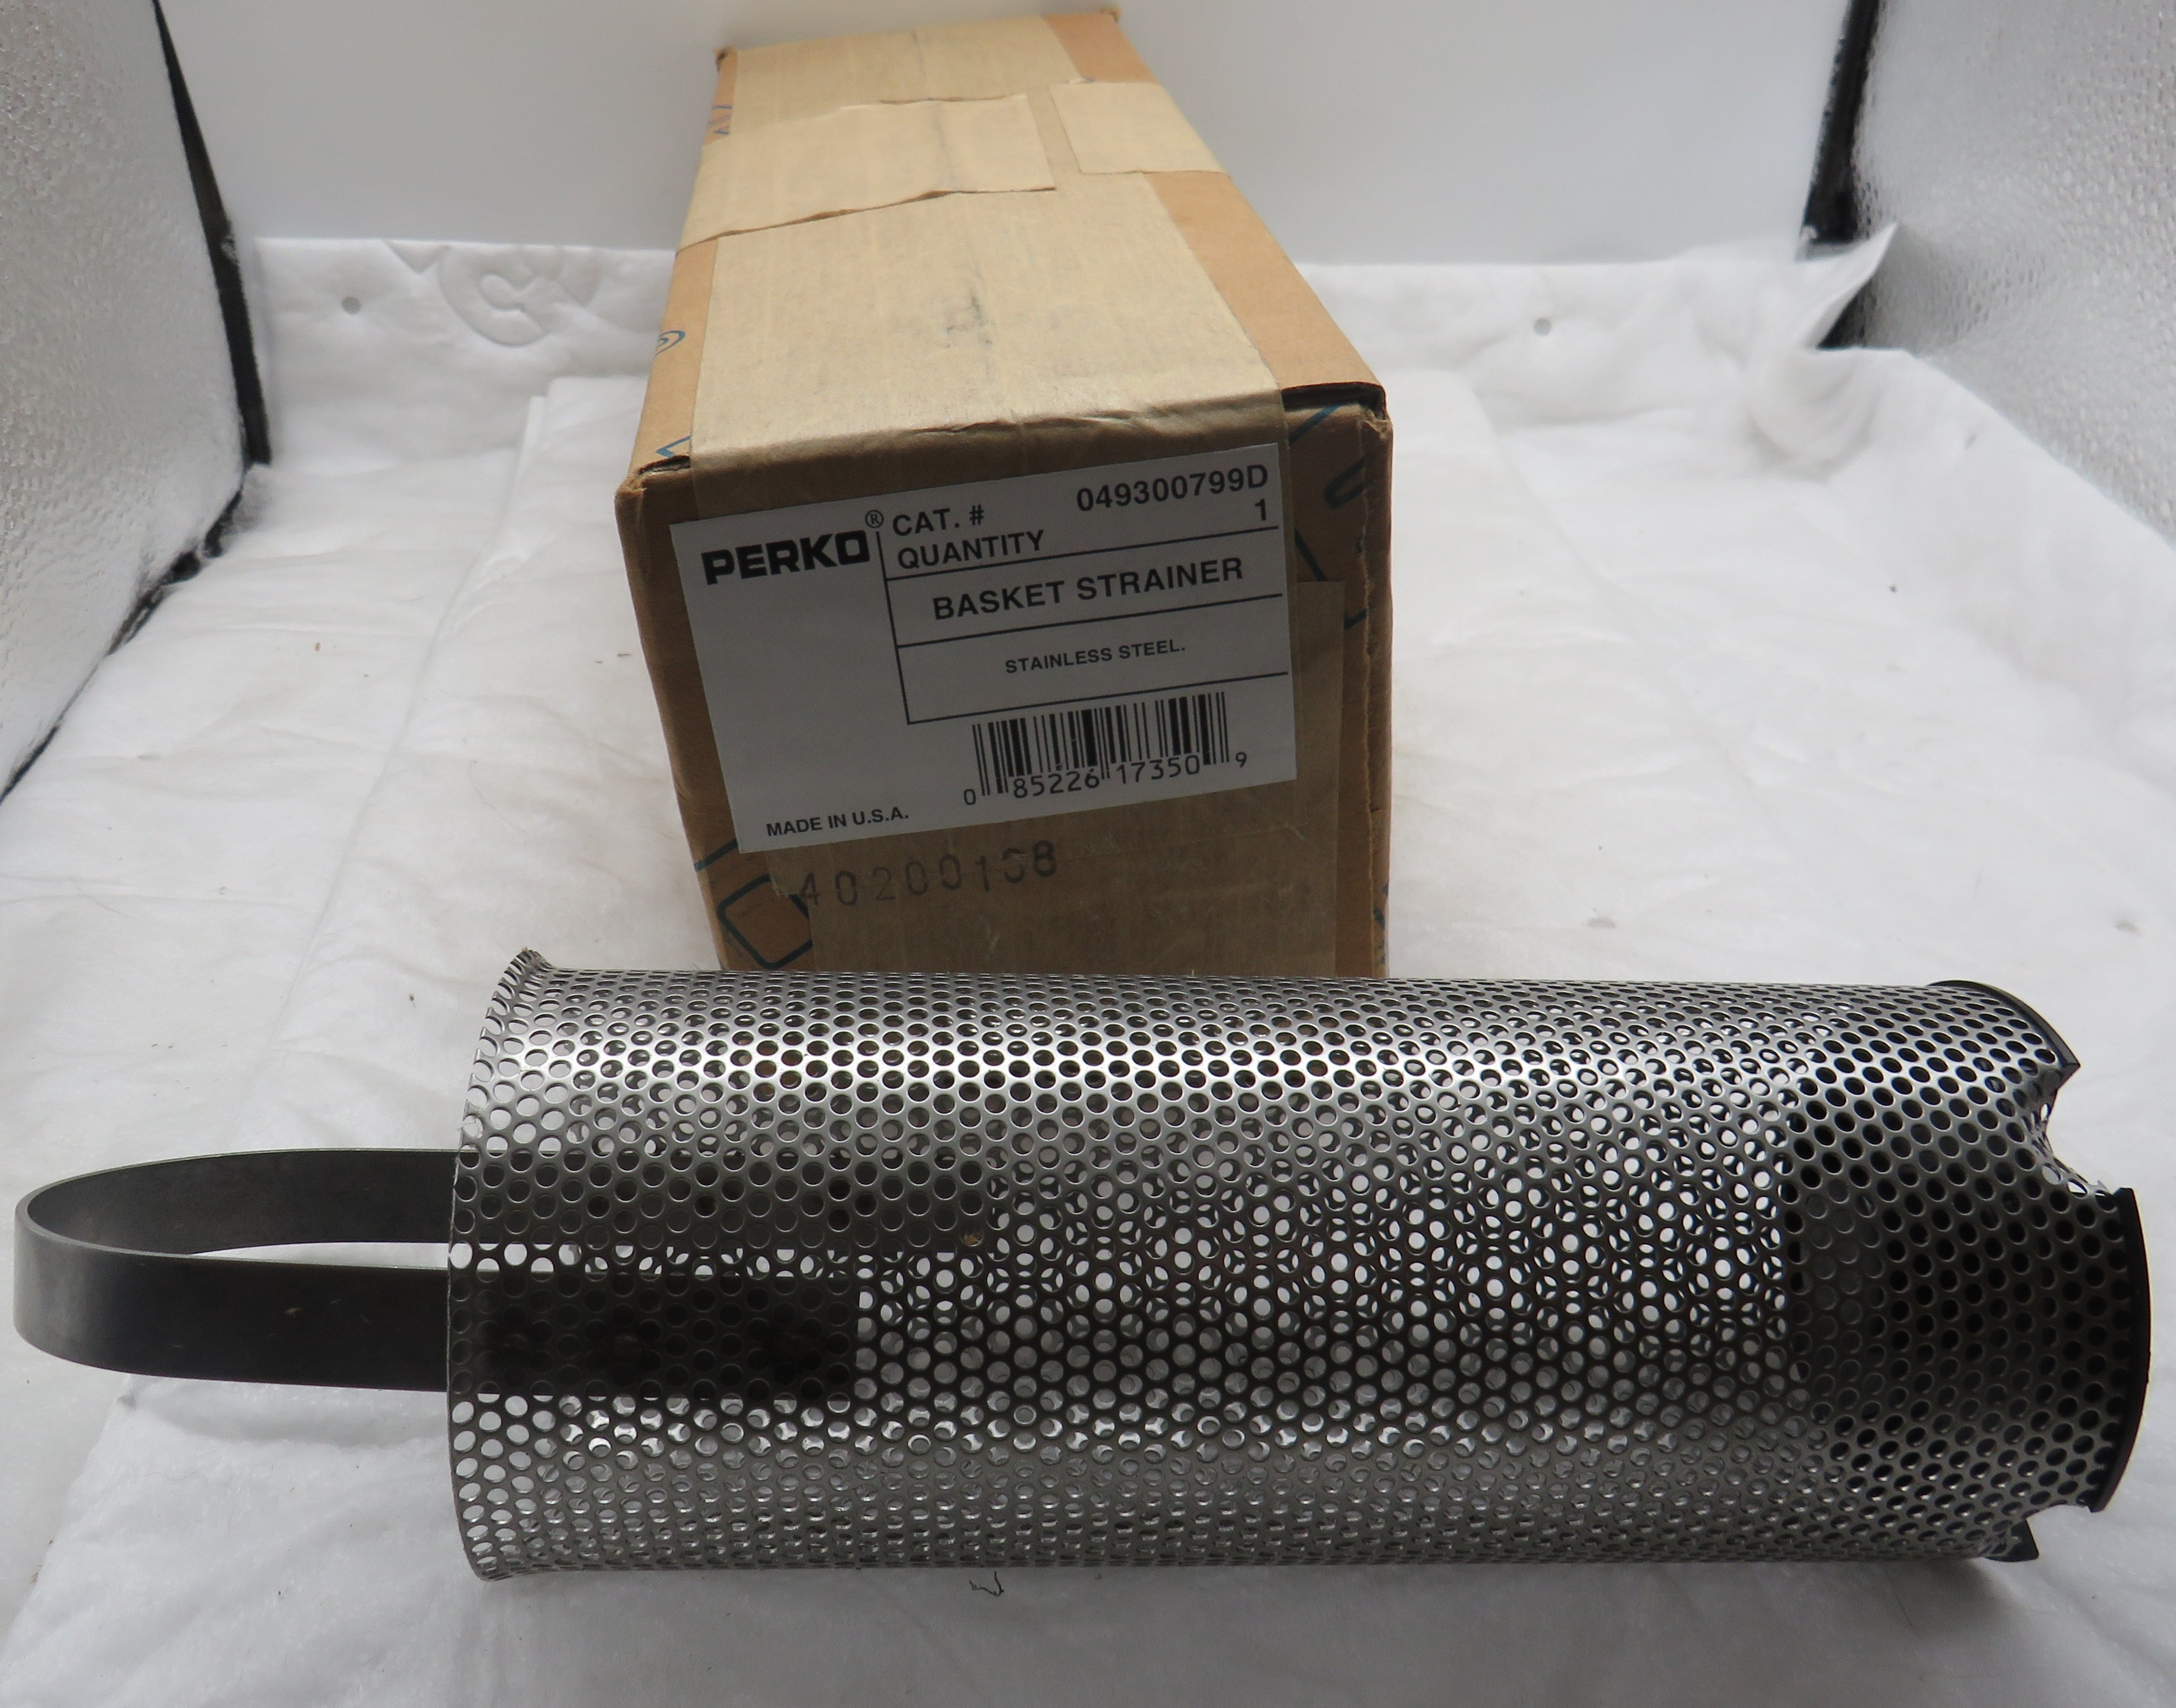 Perko 49300799D 7-99D 2-5/8x6-1/4 Filter Basket Perforated Strainer